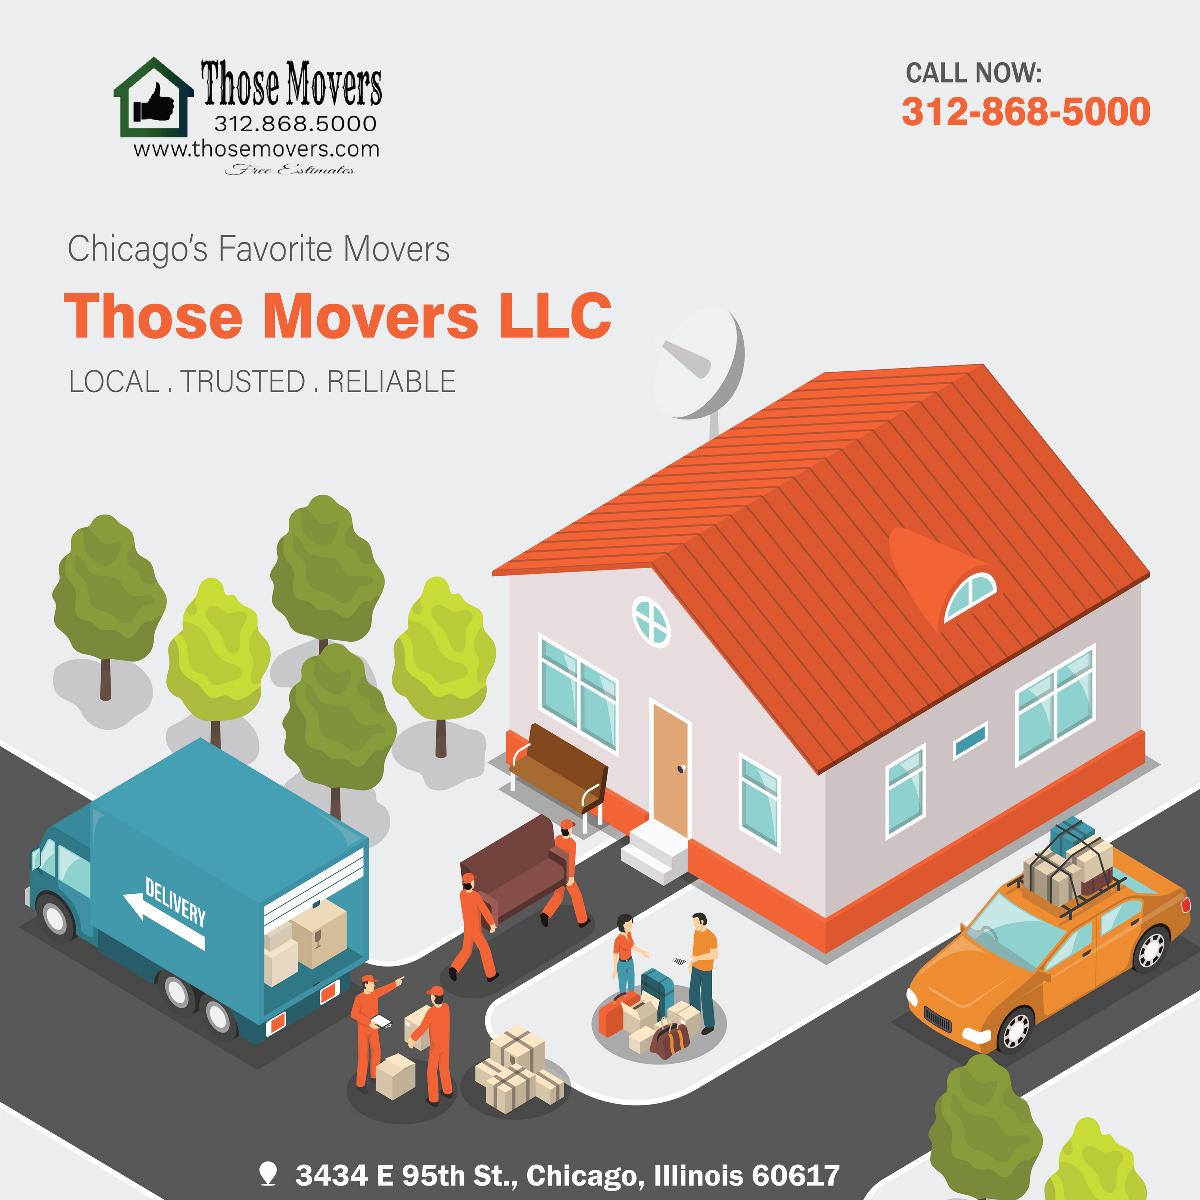 Looking for Chicago Movers?